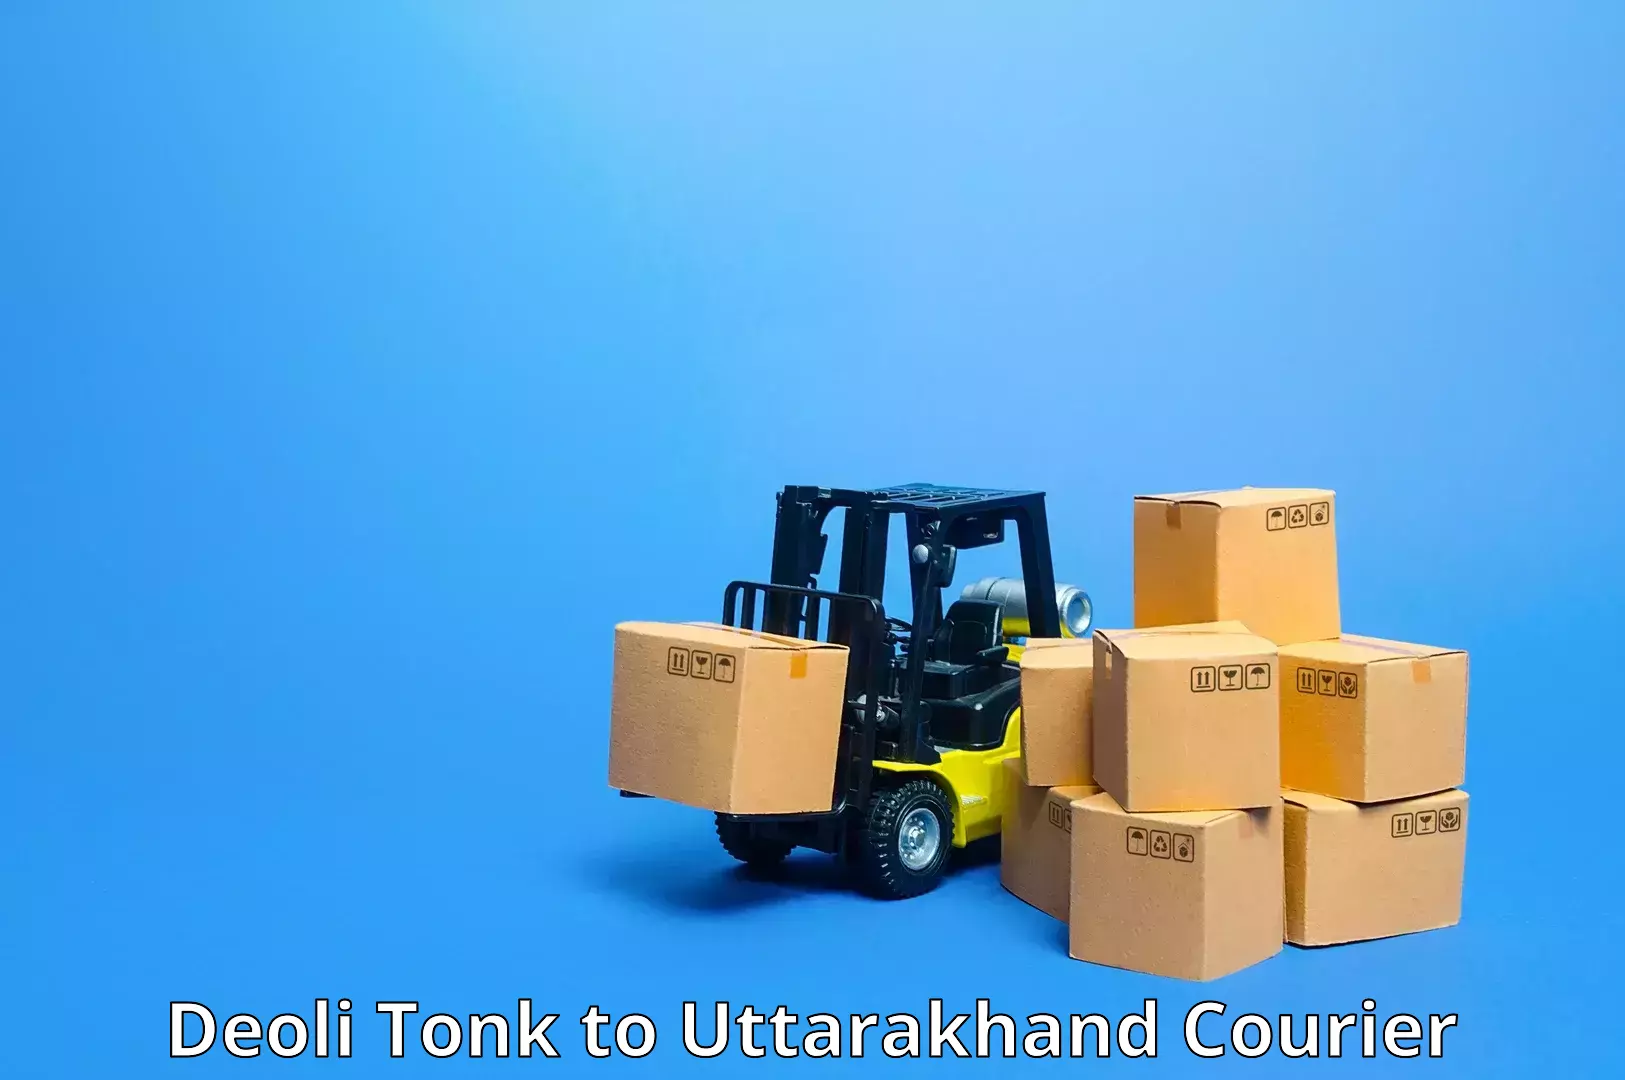 Courier service innovation in Deoli Tonk to Haldwani